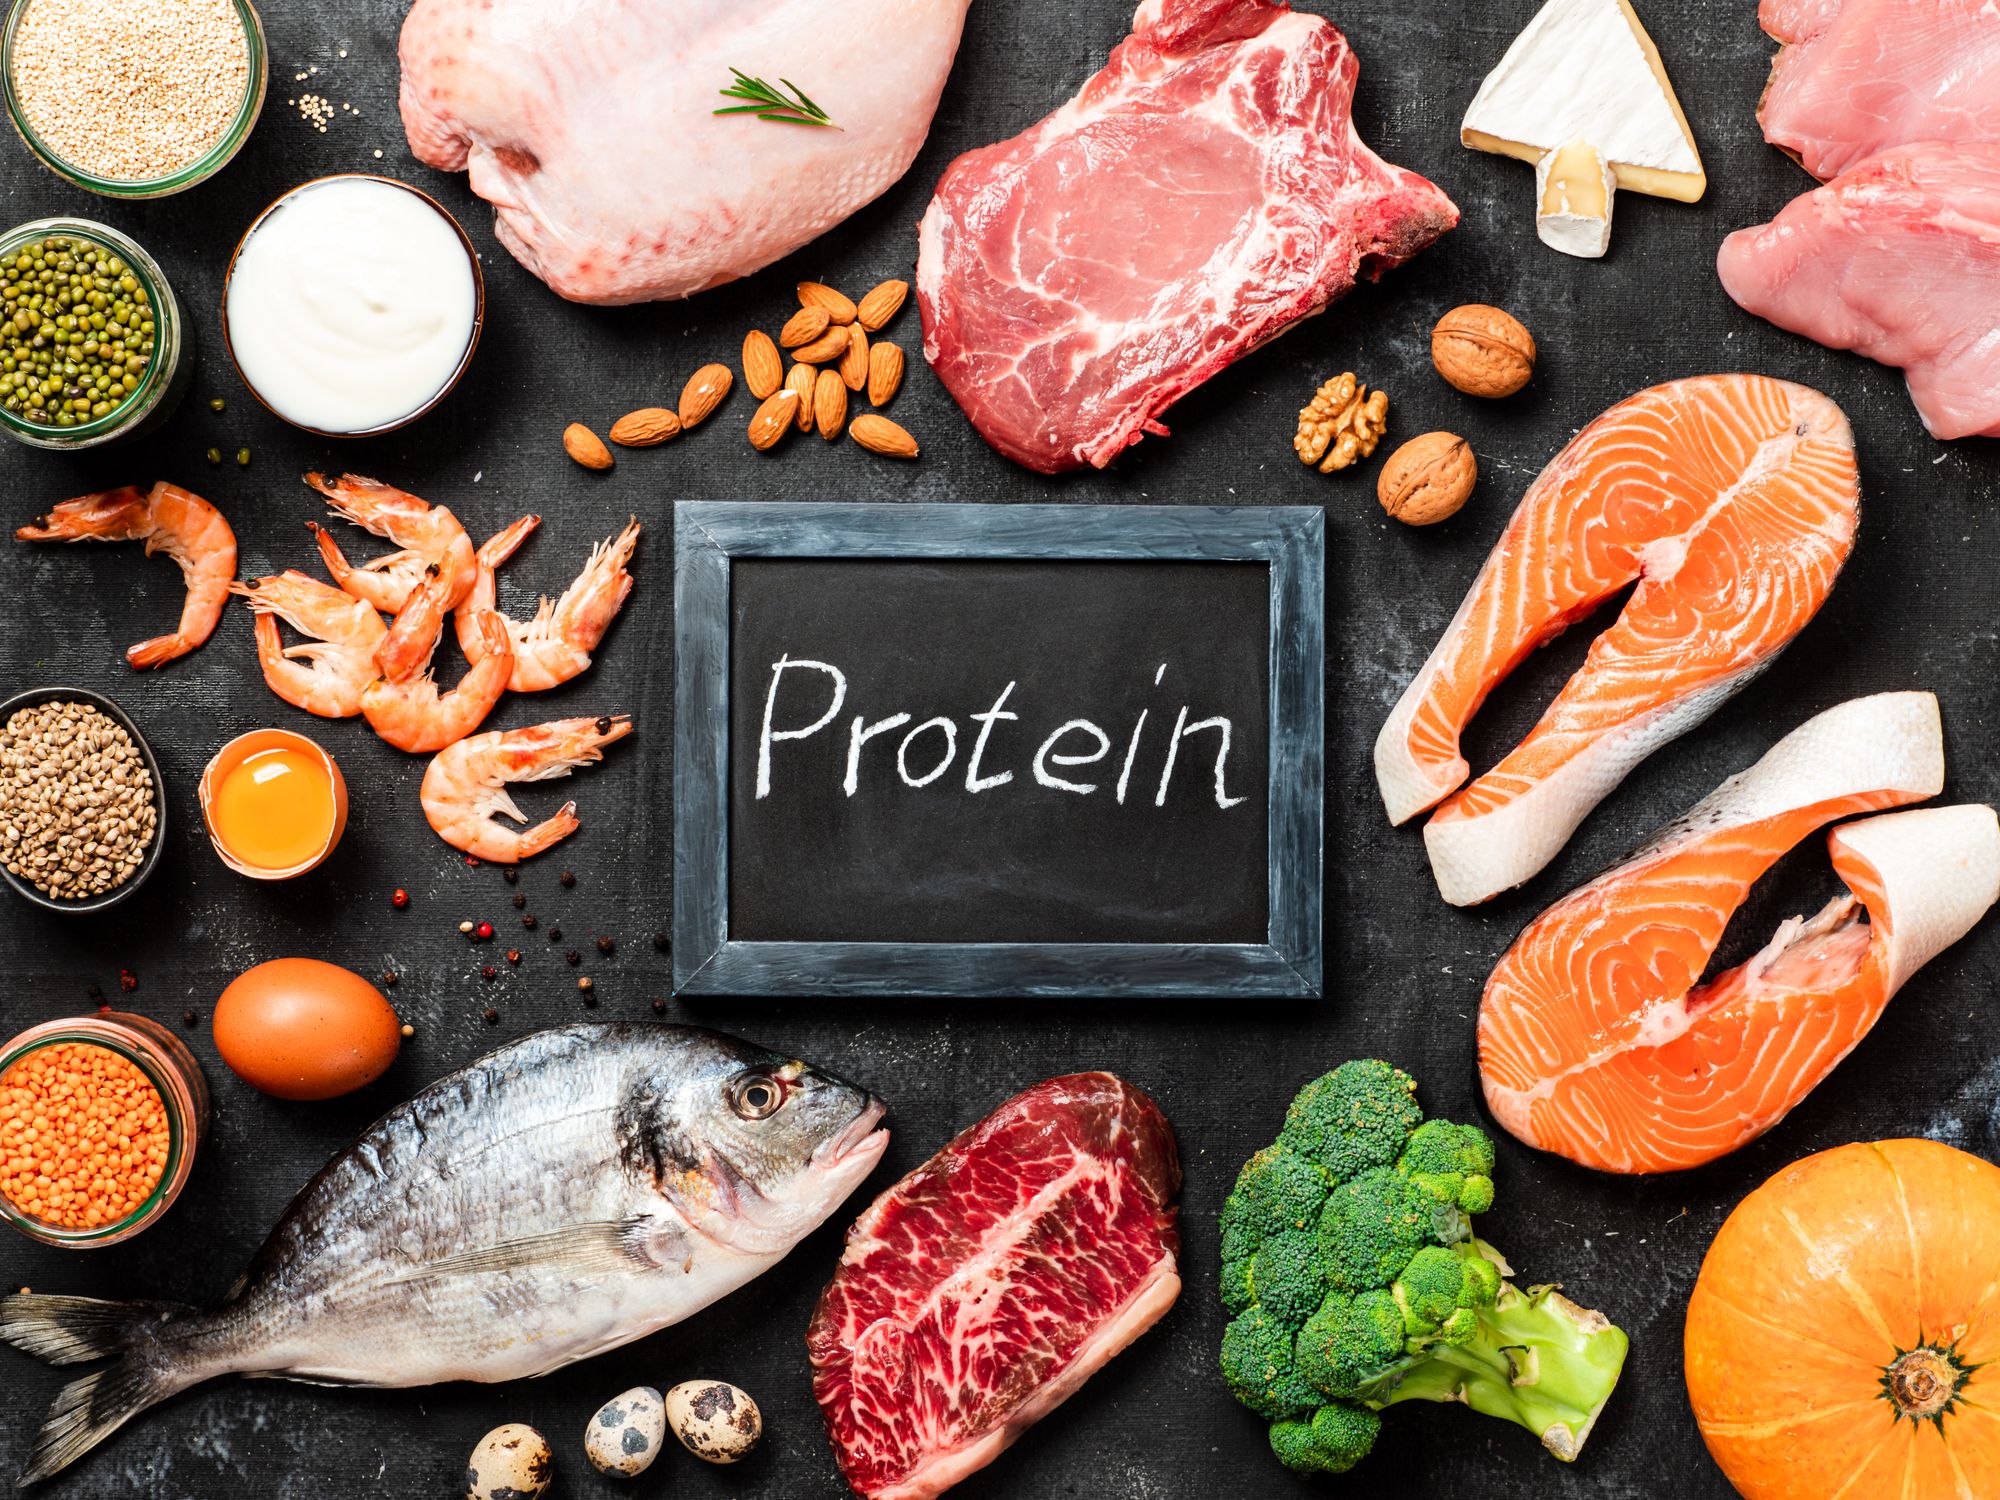 Make protein a priority after weight loss surgery